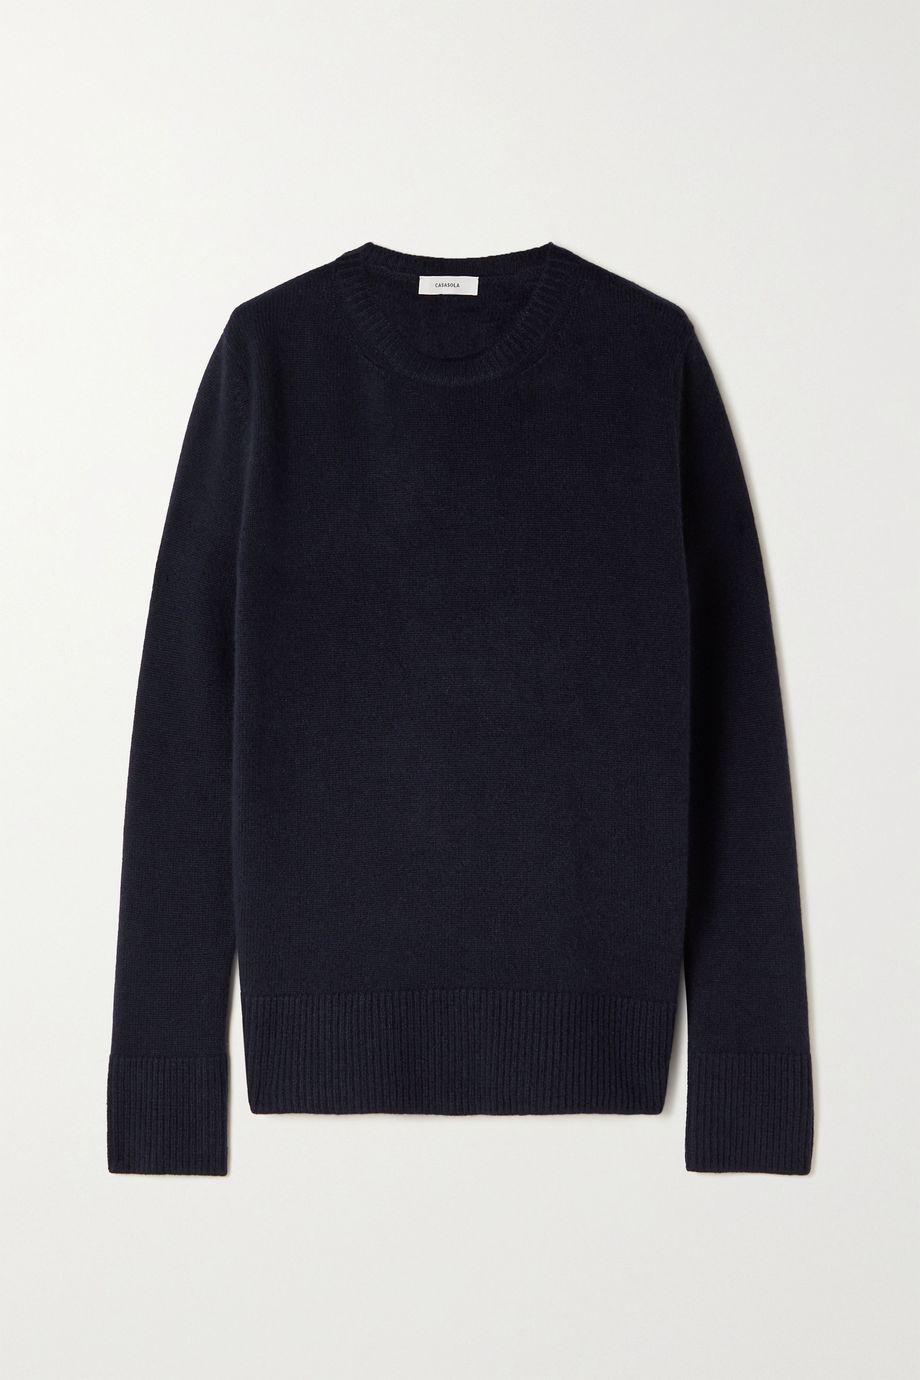 + NET SUSTAIN Maria cashmere sweater by CASASOLA